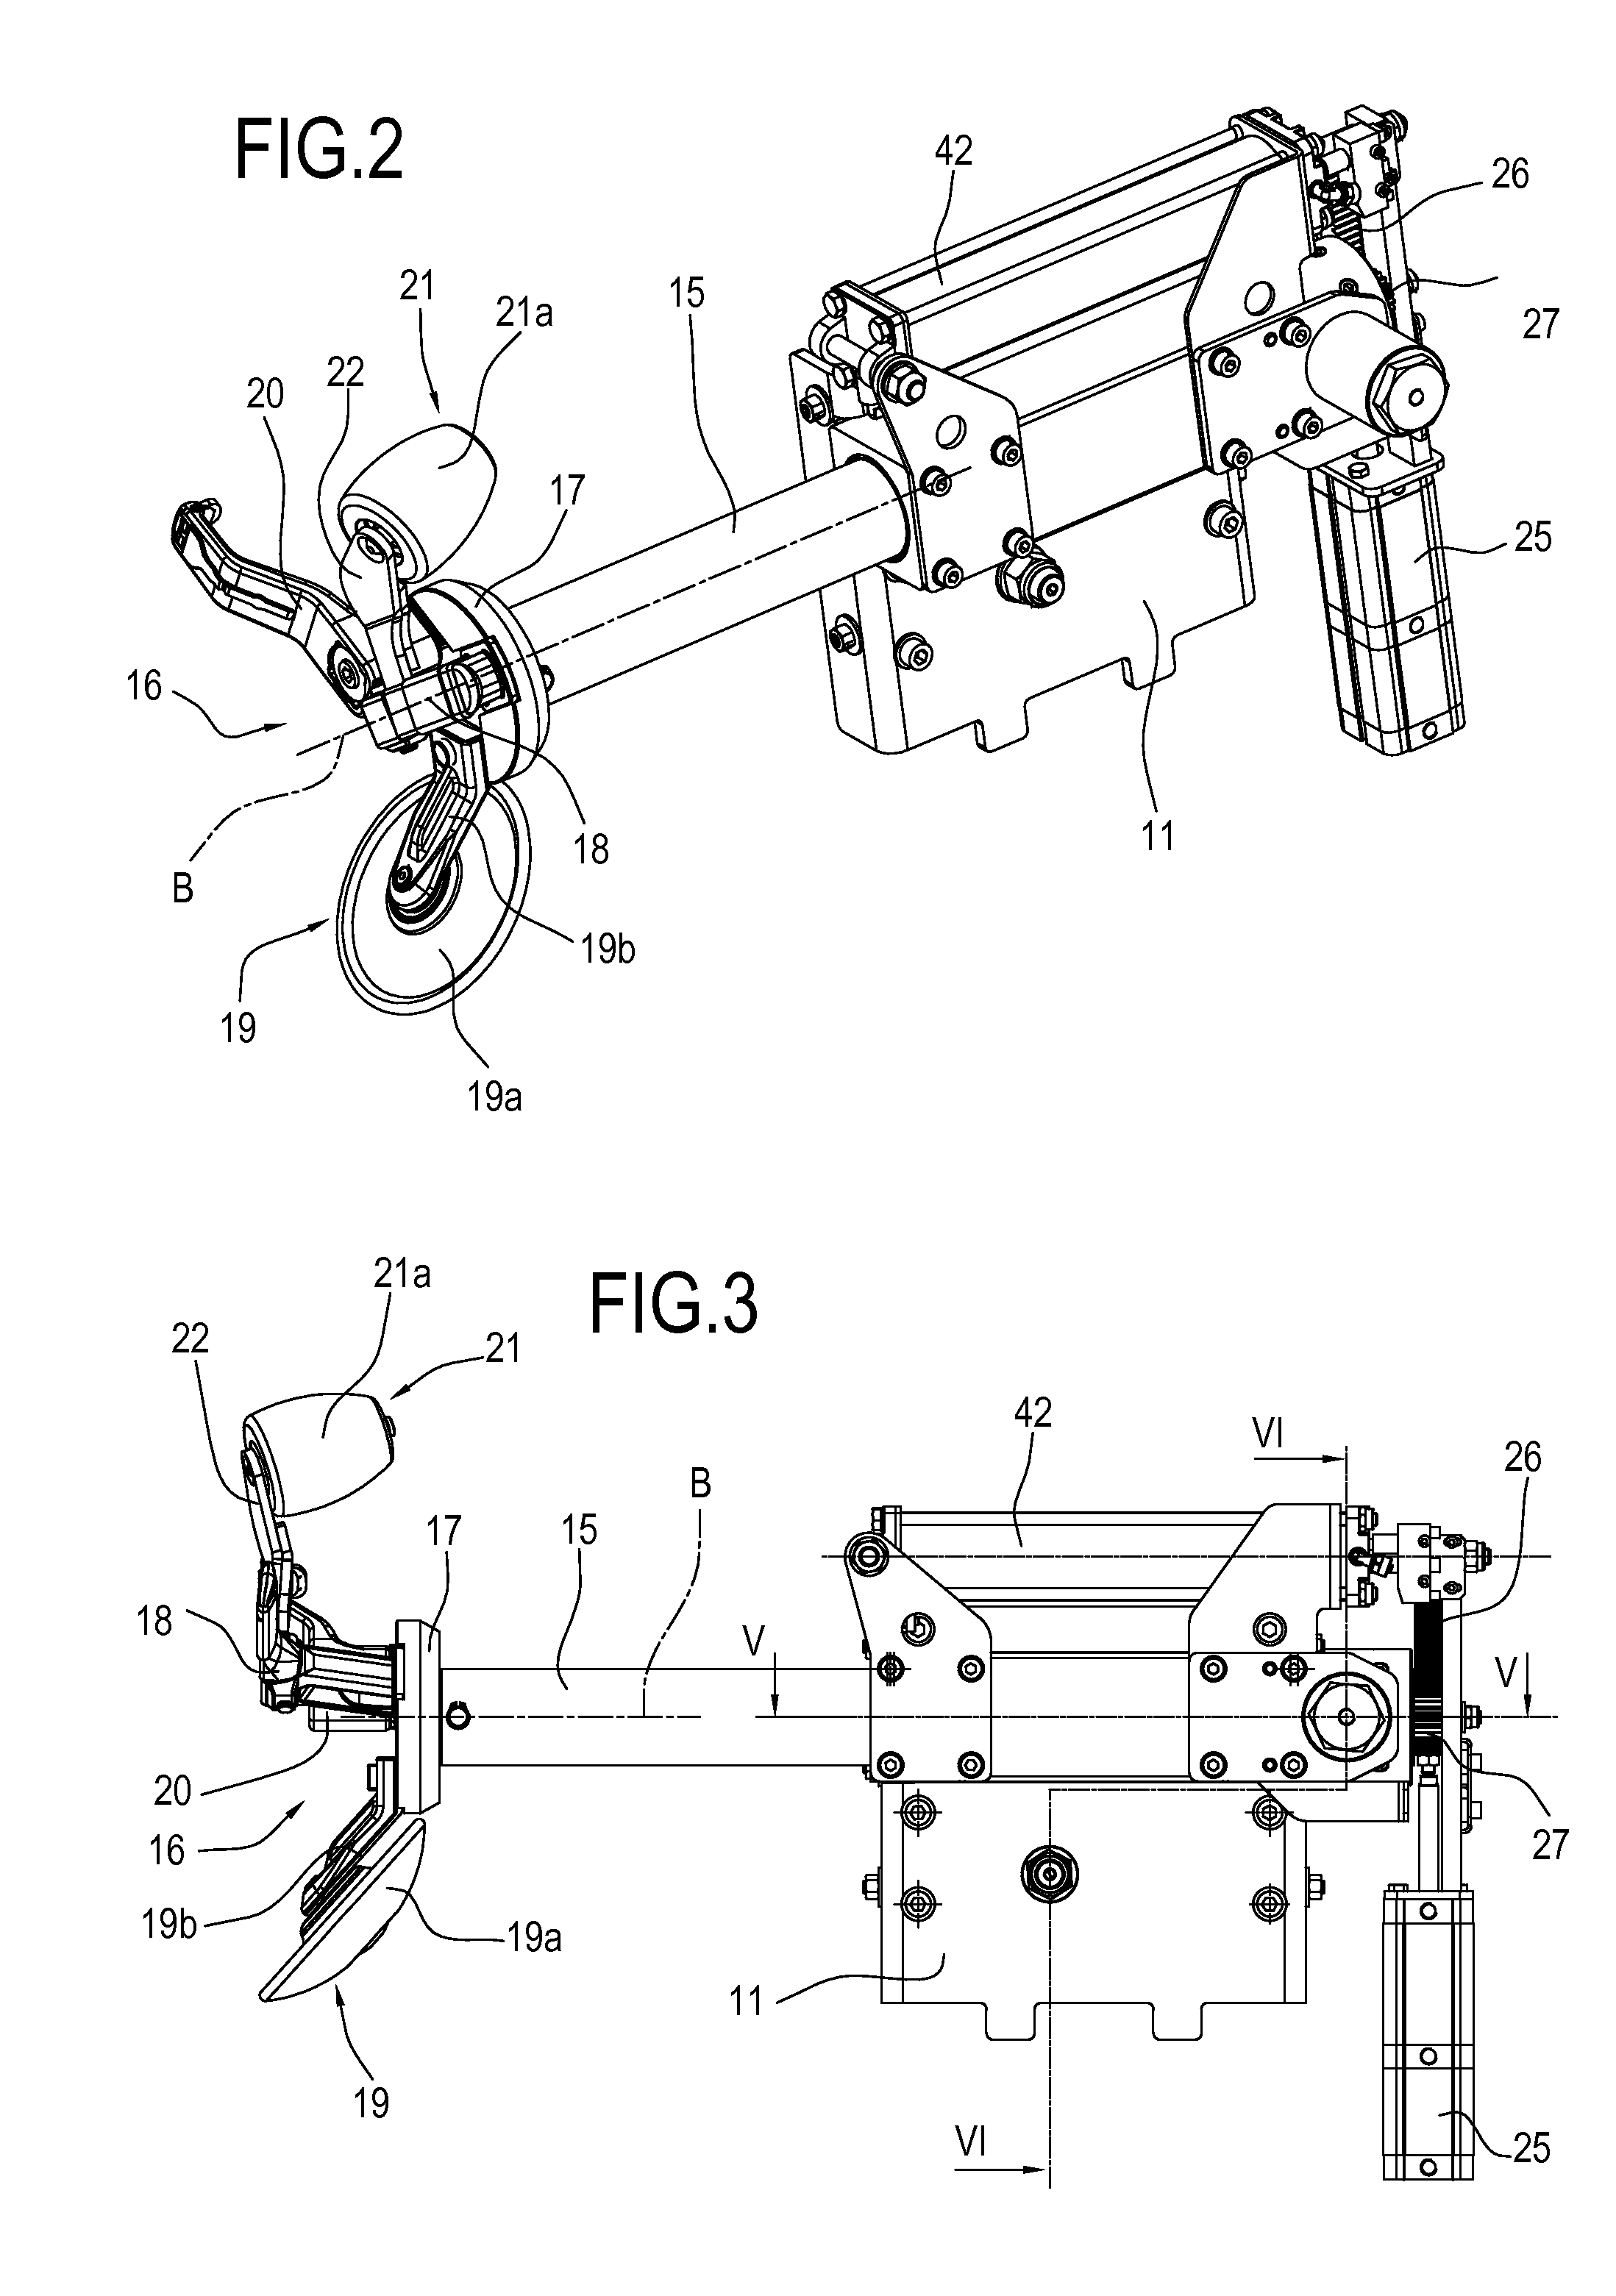 Machine and method for fitting and removing a tyre